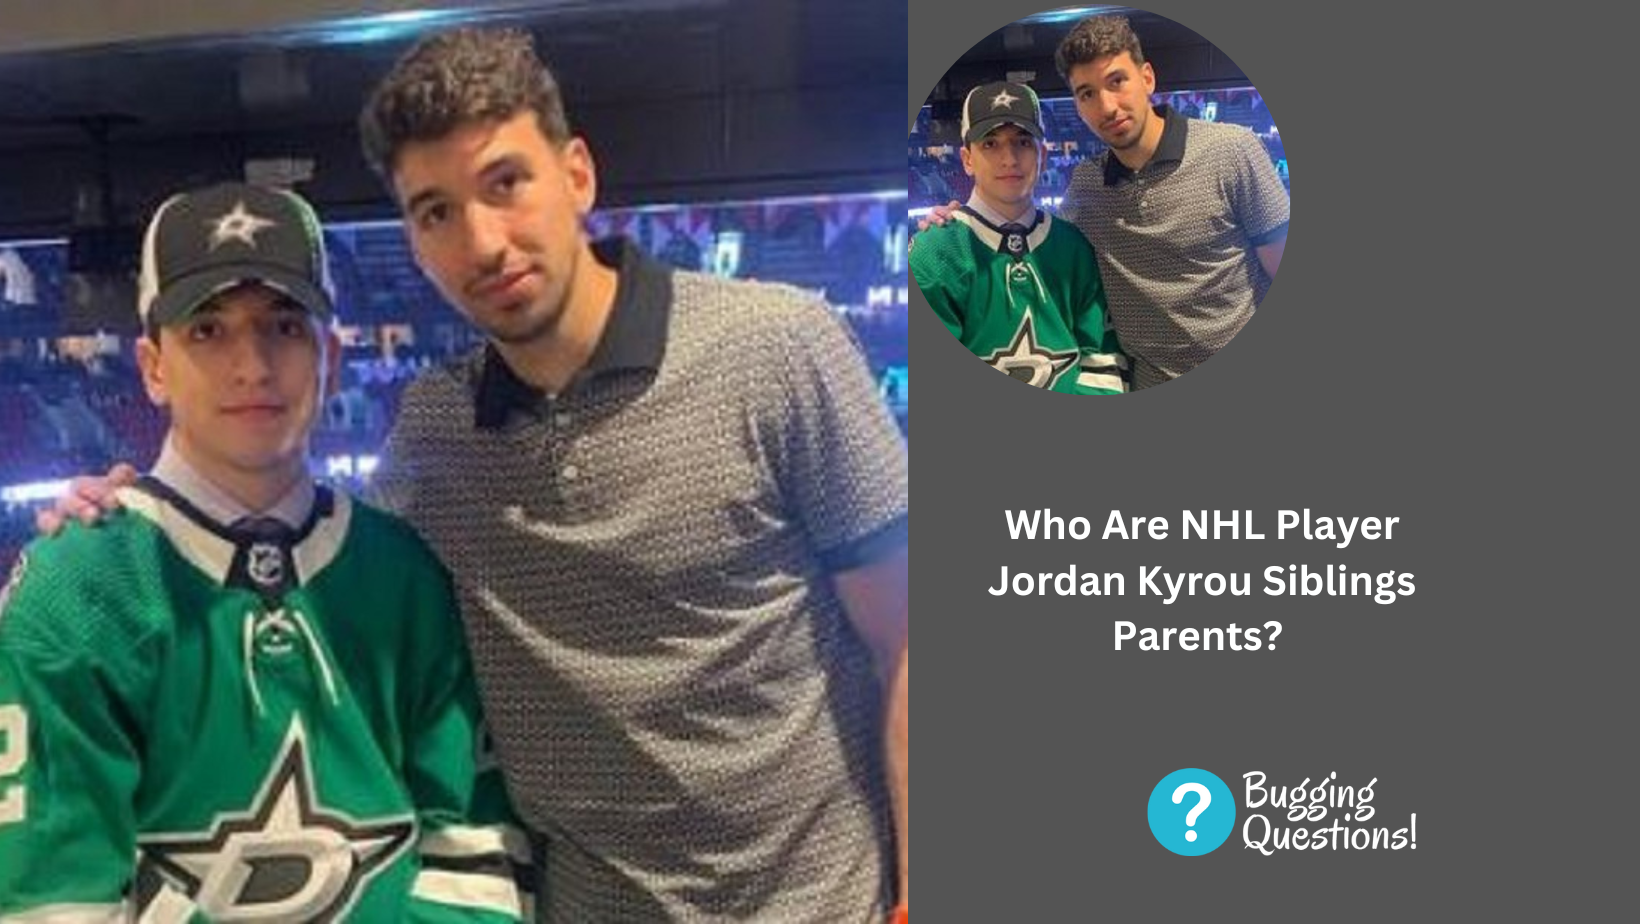 Who Are NHL Player Jordan Kyrou Siblings Parents? Know More About His Family And Ethnicity